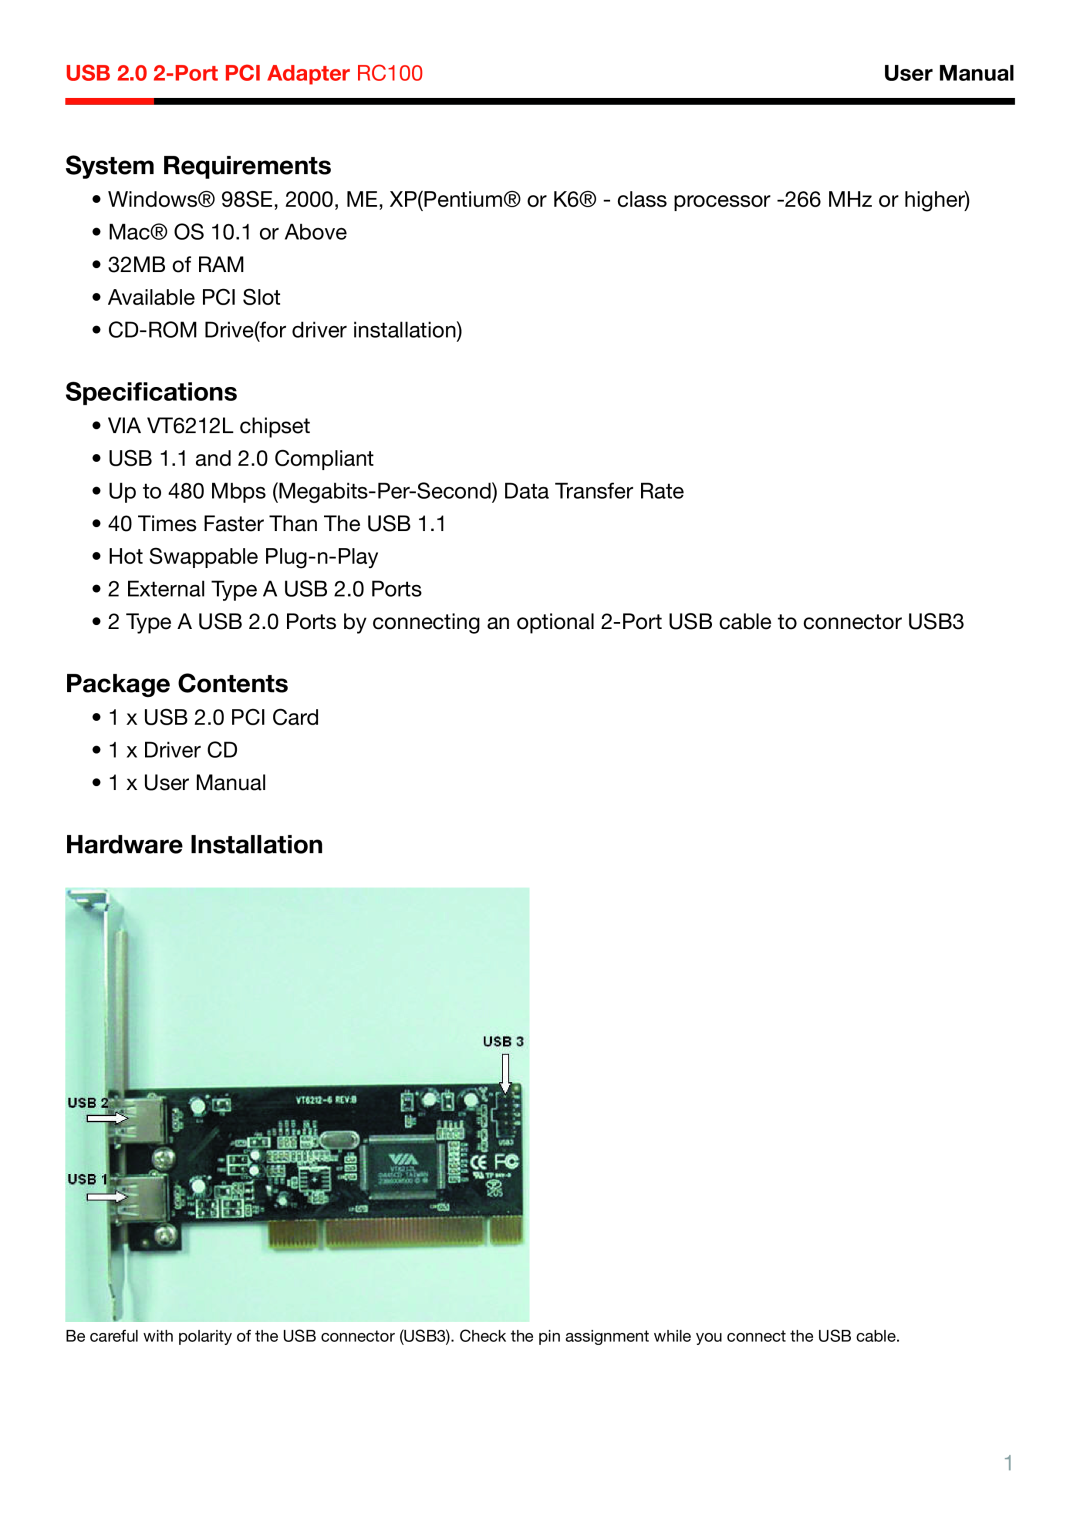 Rosewill RC-100 USB 2.0 2-Port PCI Adapter RC100, User Manual, System Requirements, Speciﬁcations, Package Contents 